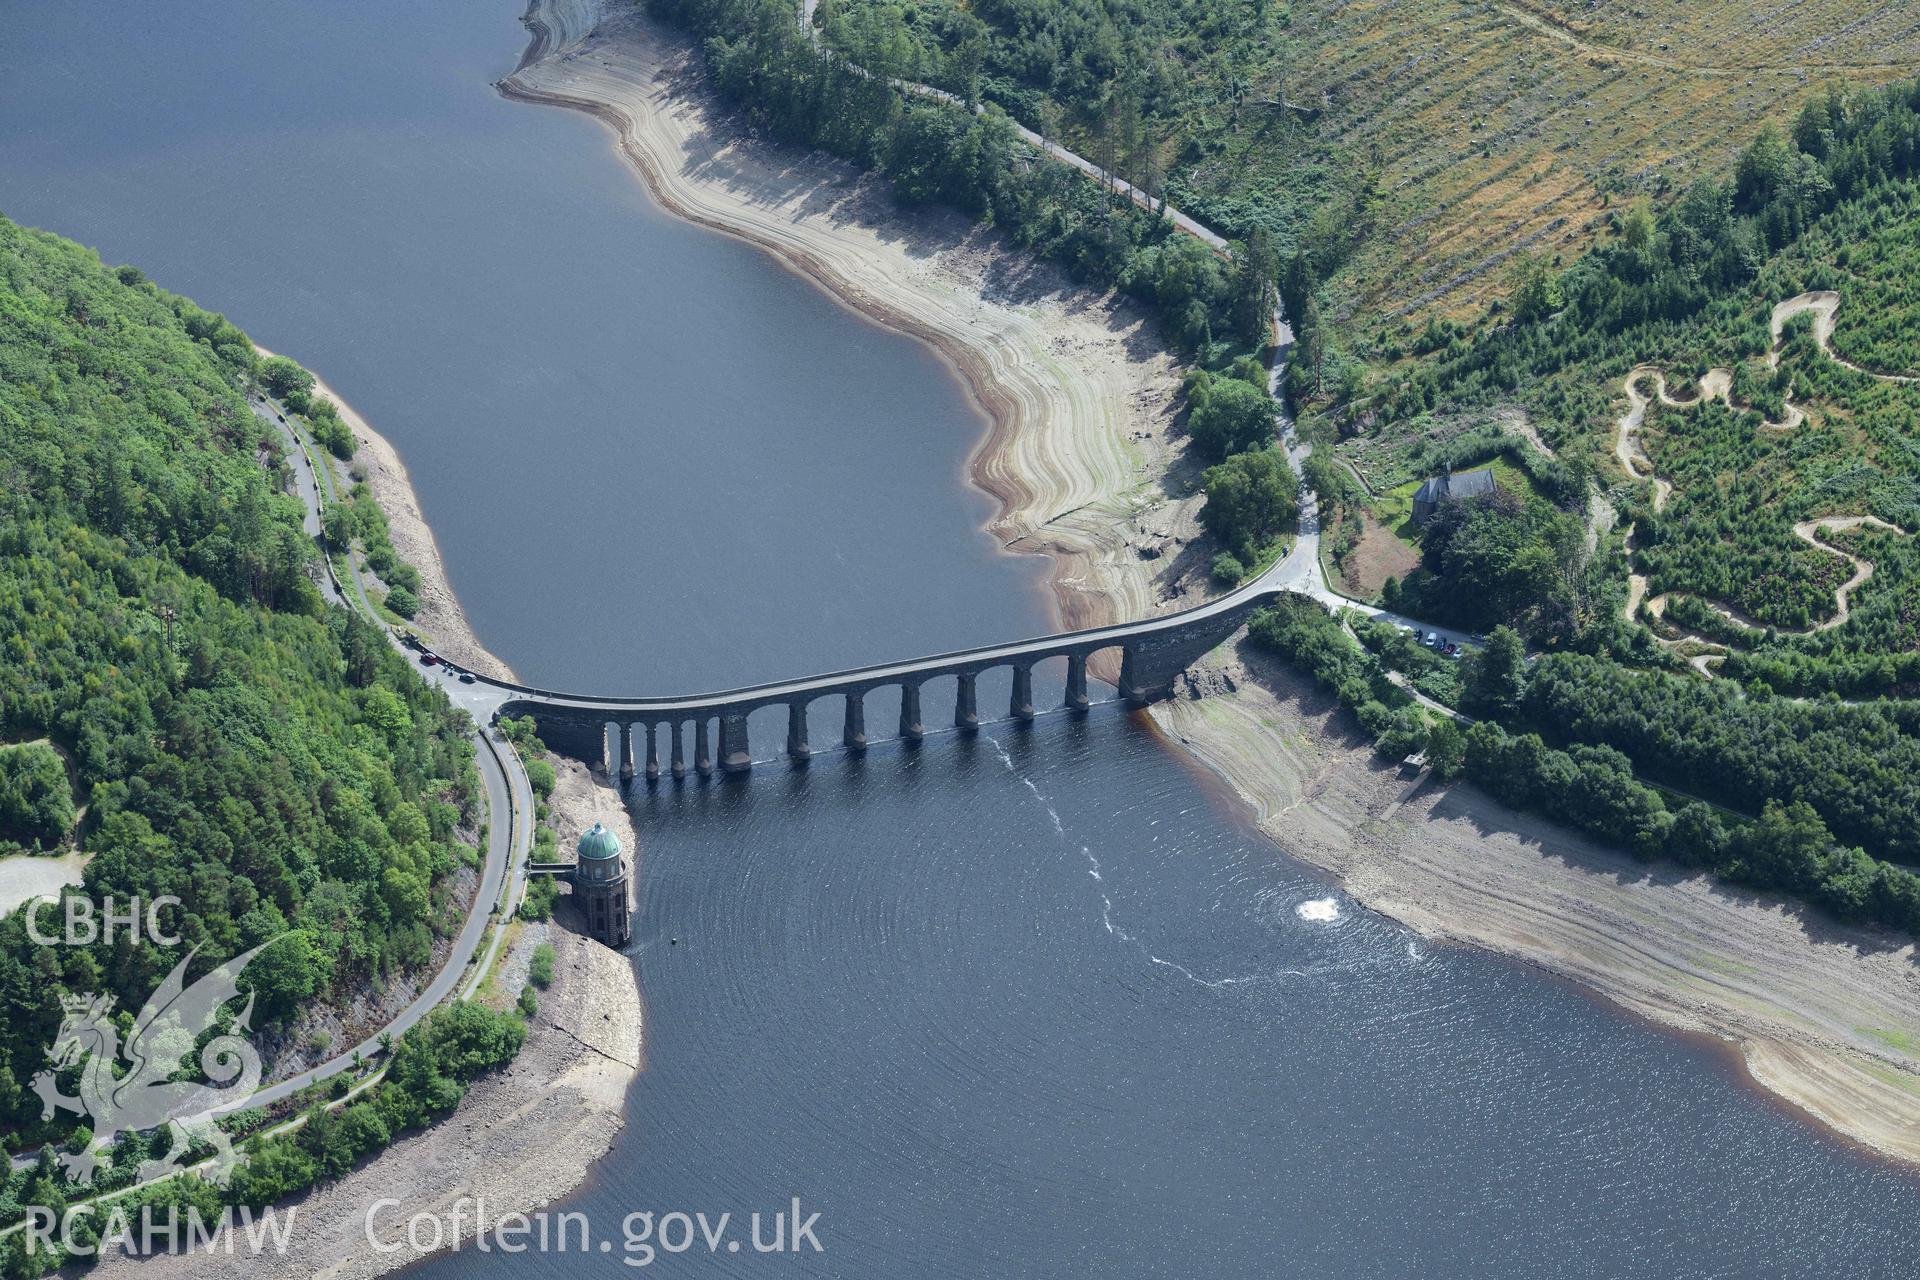 View of Garreg-Ddu Dam, Elan Valley under drought conditions. Oblique aerial photograph taken during the Royal Commission’s programme of archaeological aerial reconnaissance by Toby Driver on 19 August 2022.